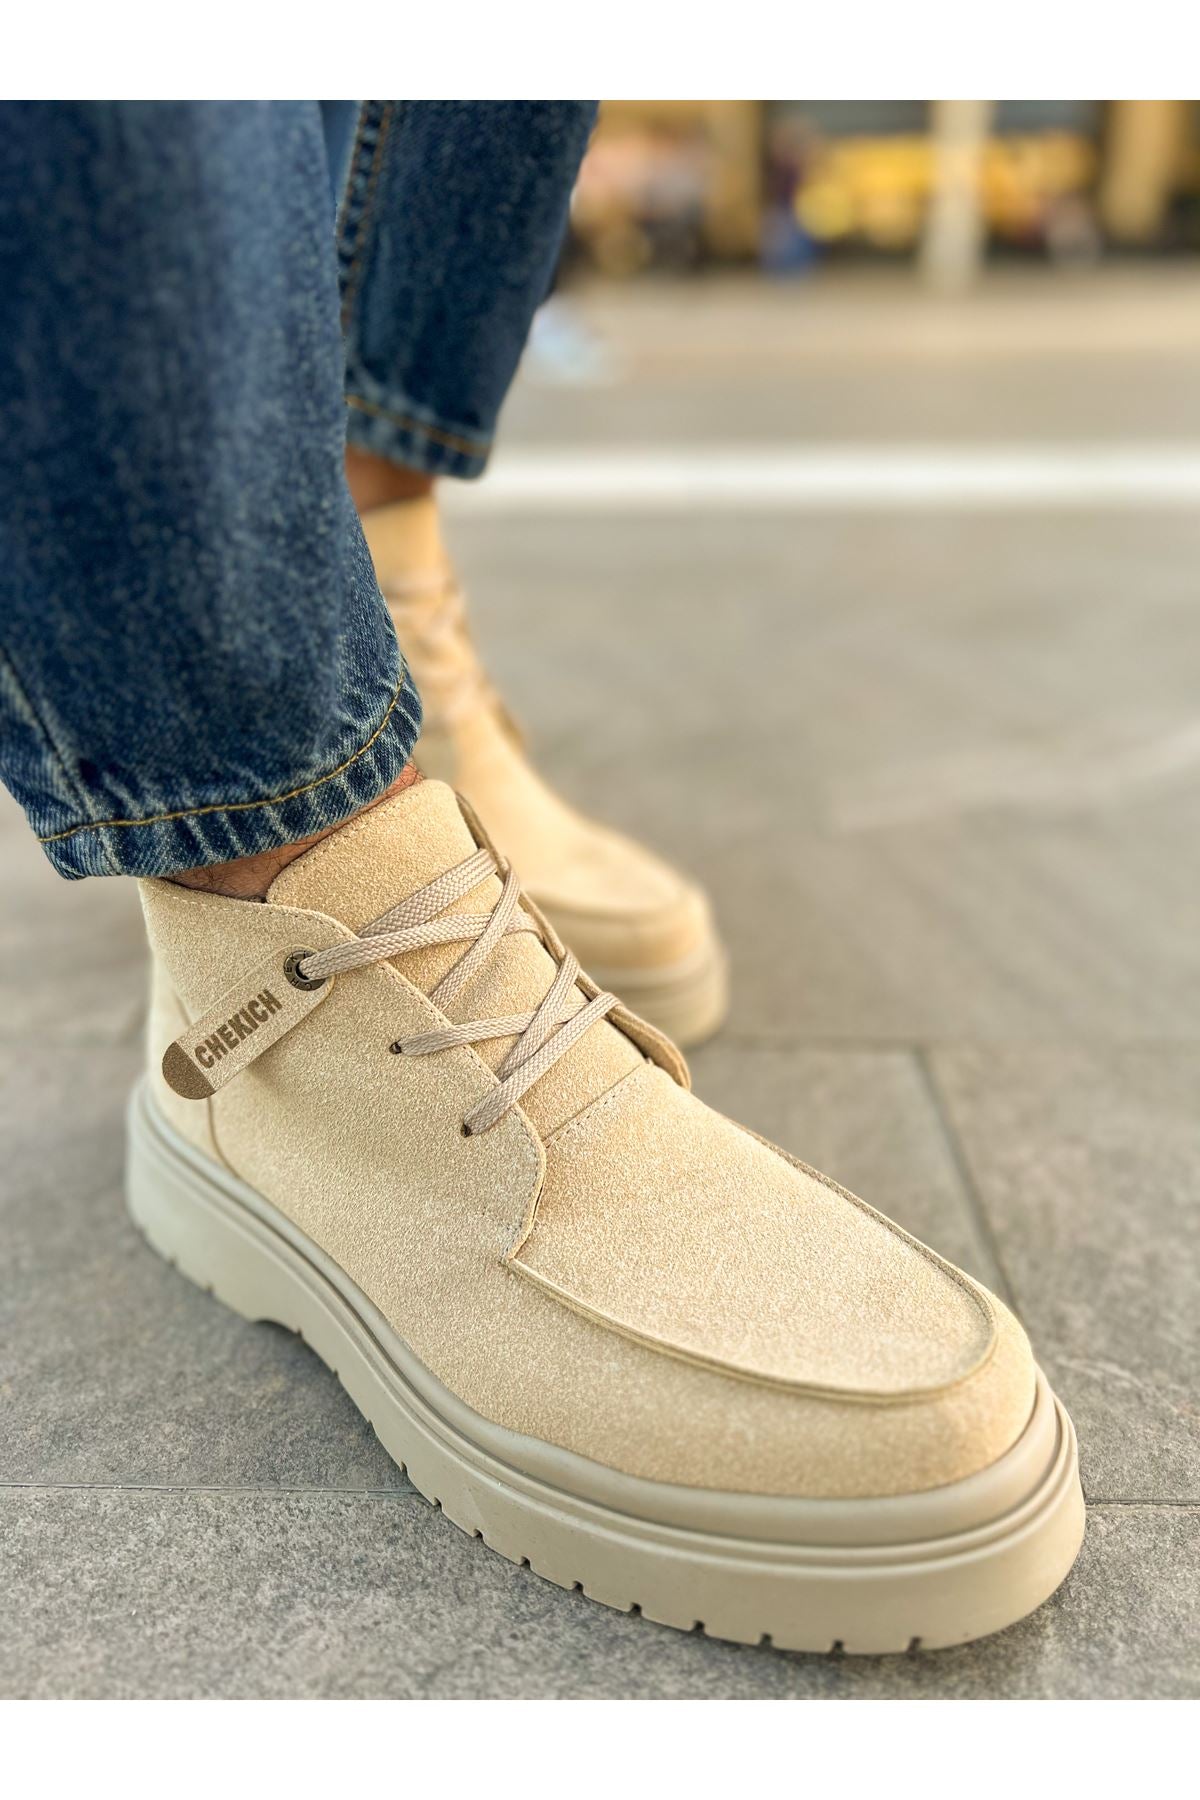 CH213 Men's Boots SAND Suede - STREETMODE ™